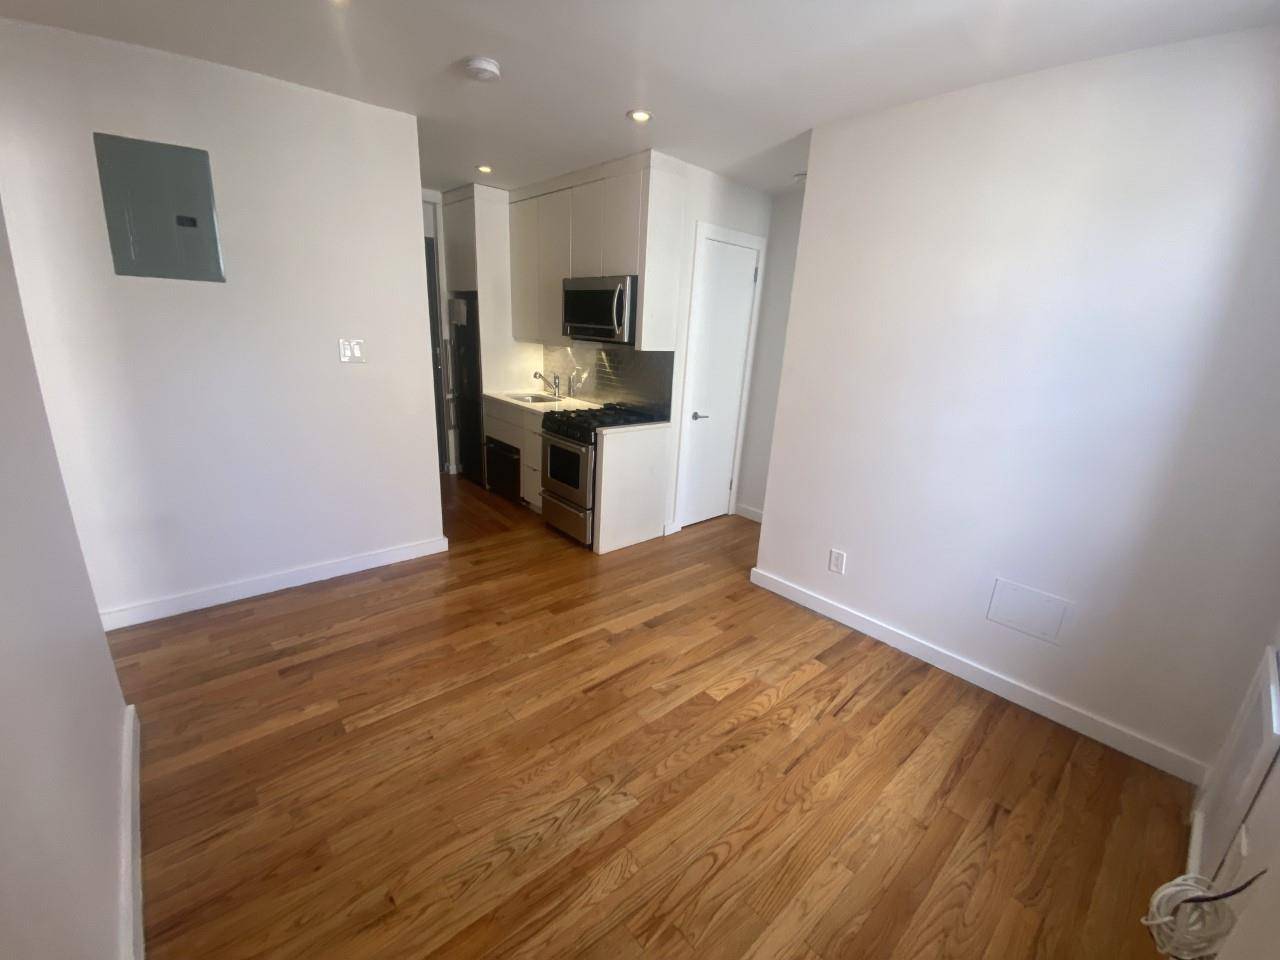 Beautiful 2 bedroom ! 2nd floor walk up Laundry in unit Dishwasher Inquire for video tourPrime South Park Slope apartment featuring exposed brick, bleached plank floors, custom lacquer white kitchen ...